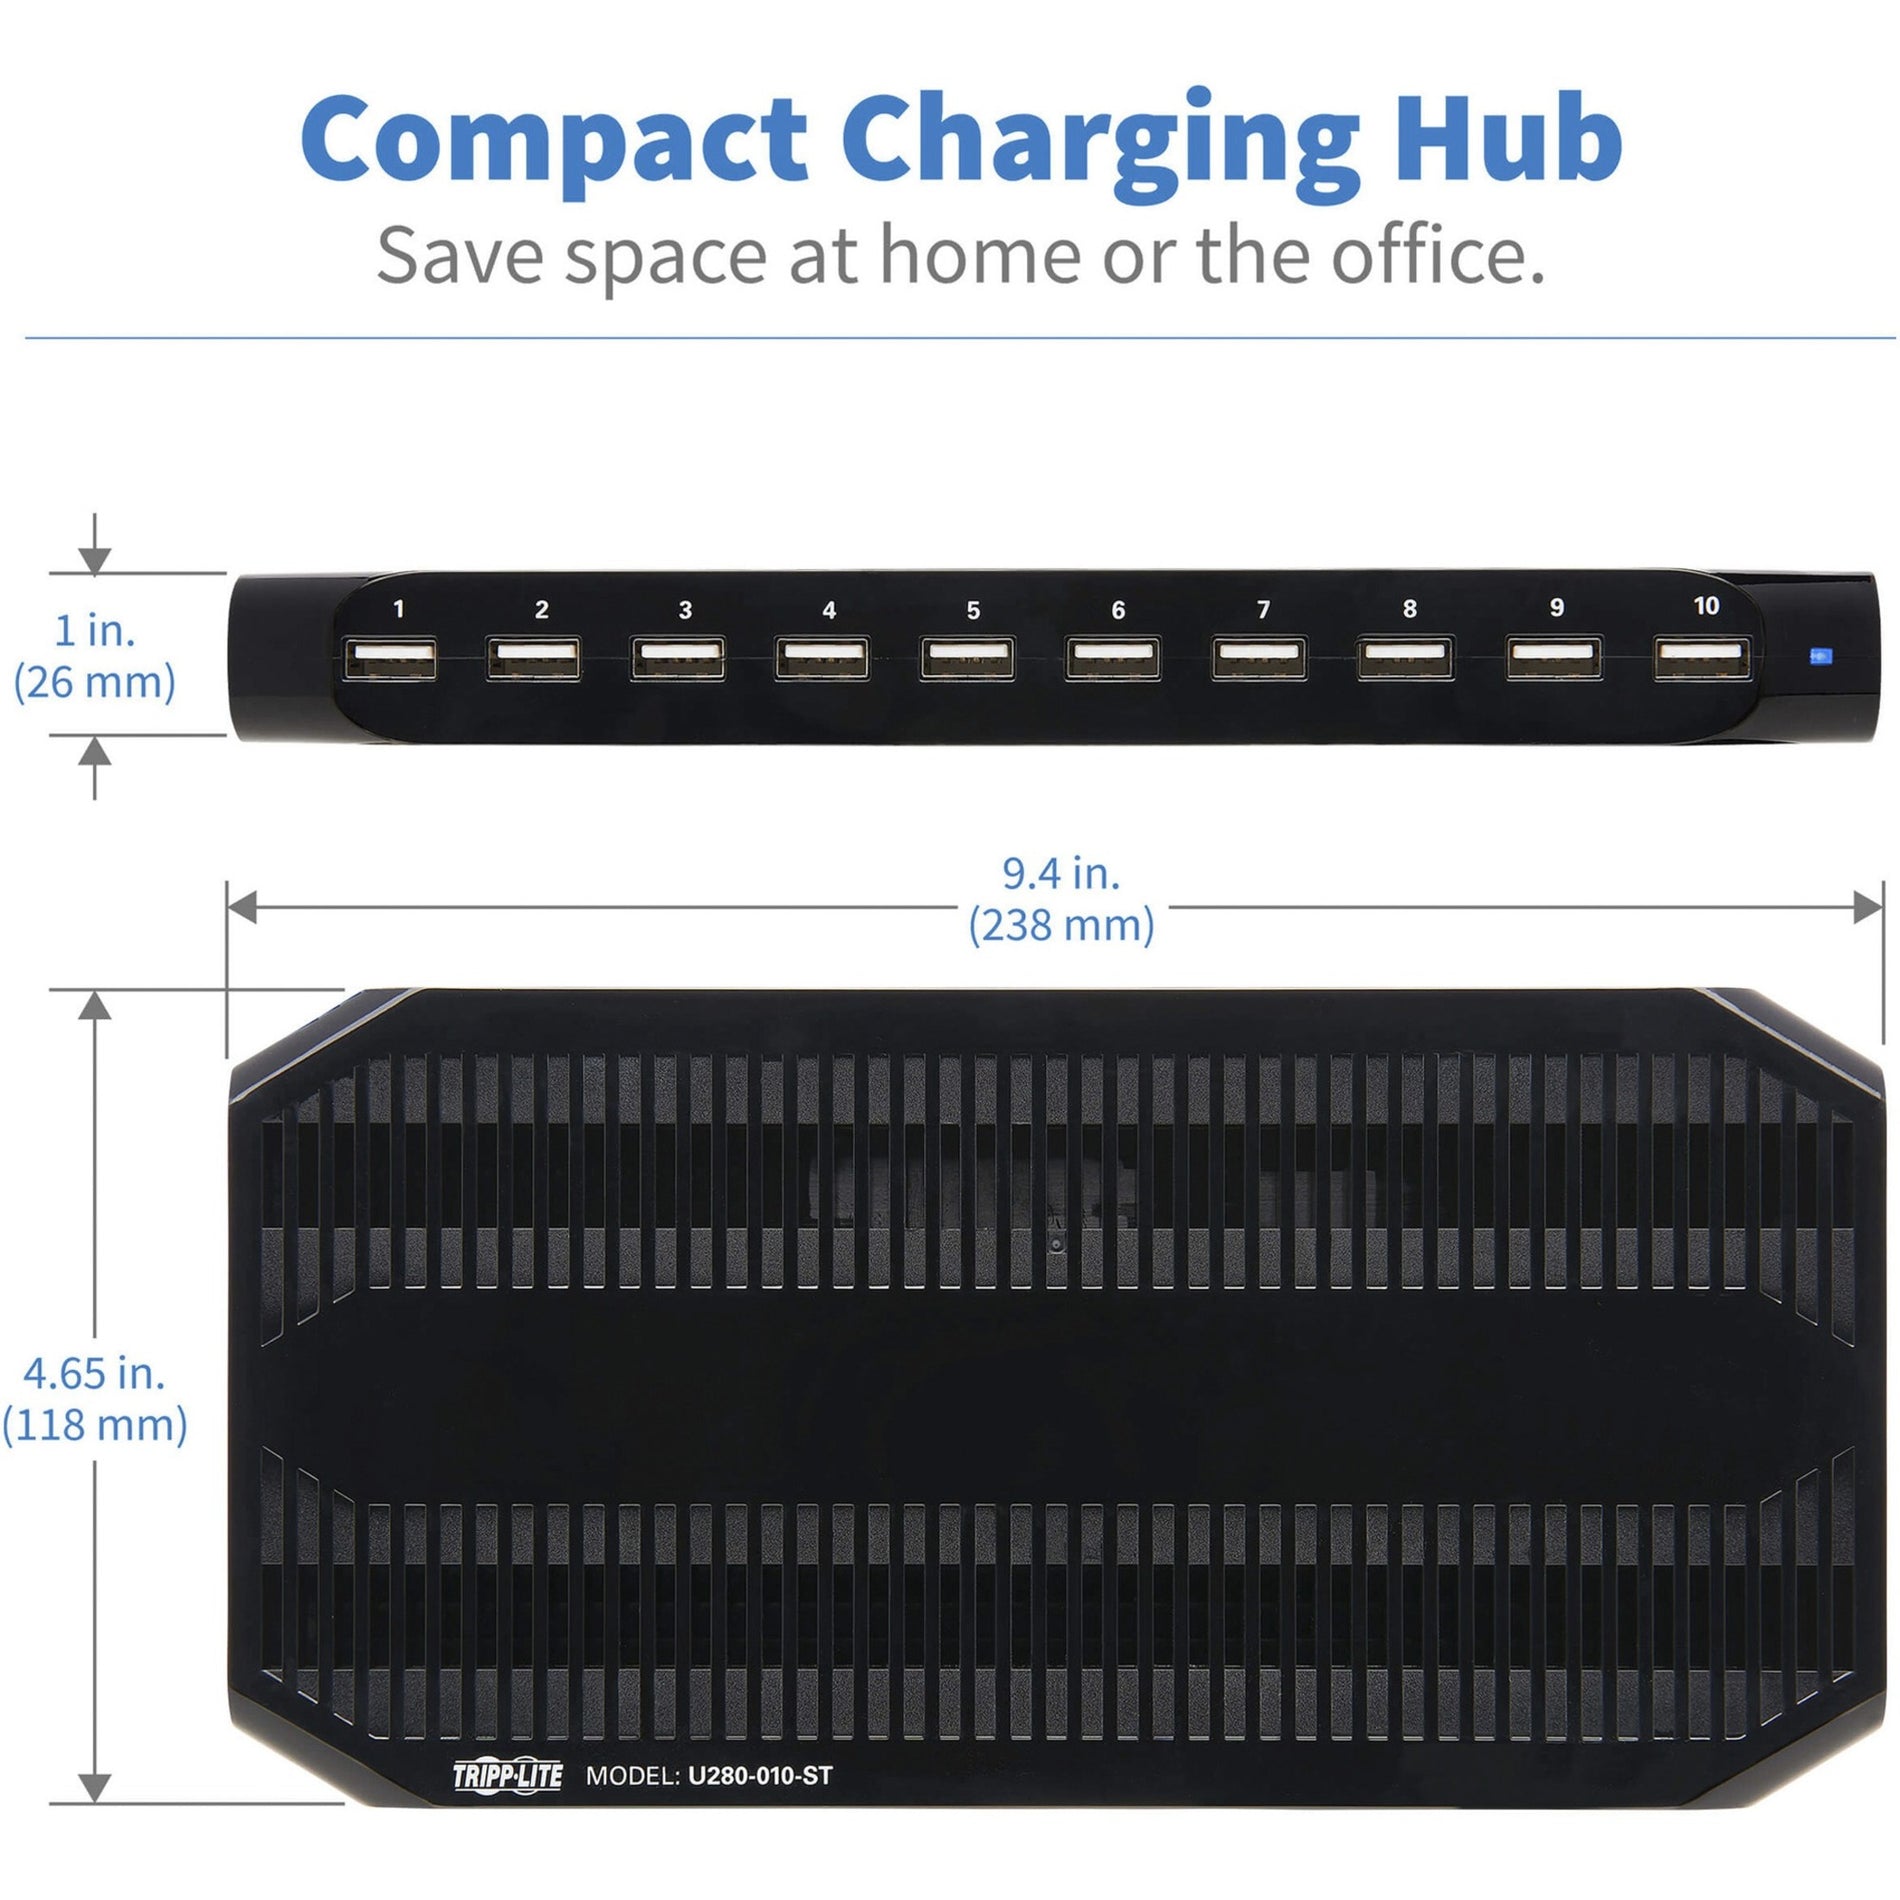 Tripp Lite U280-010-ST 10-Port USB Charger with Built-In Storage, Fast Charging for iPad, Smartphone, Tablet, Notebook